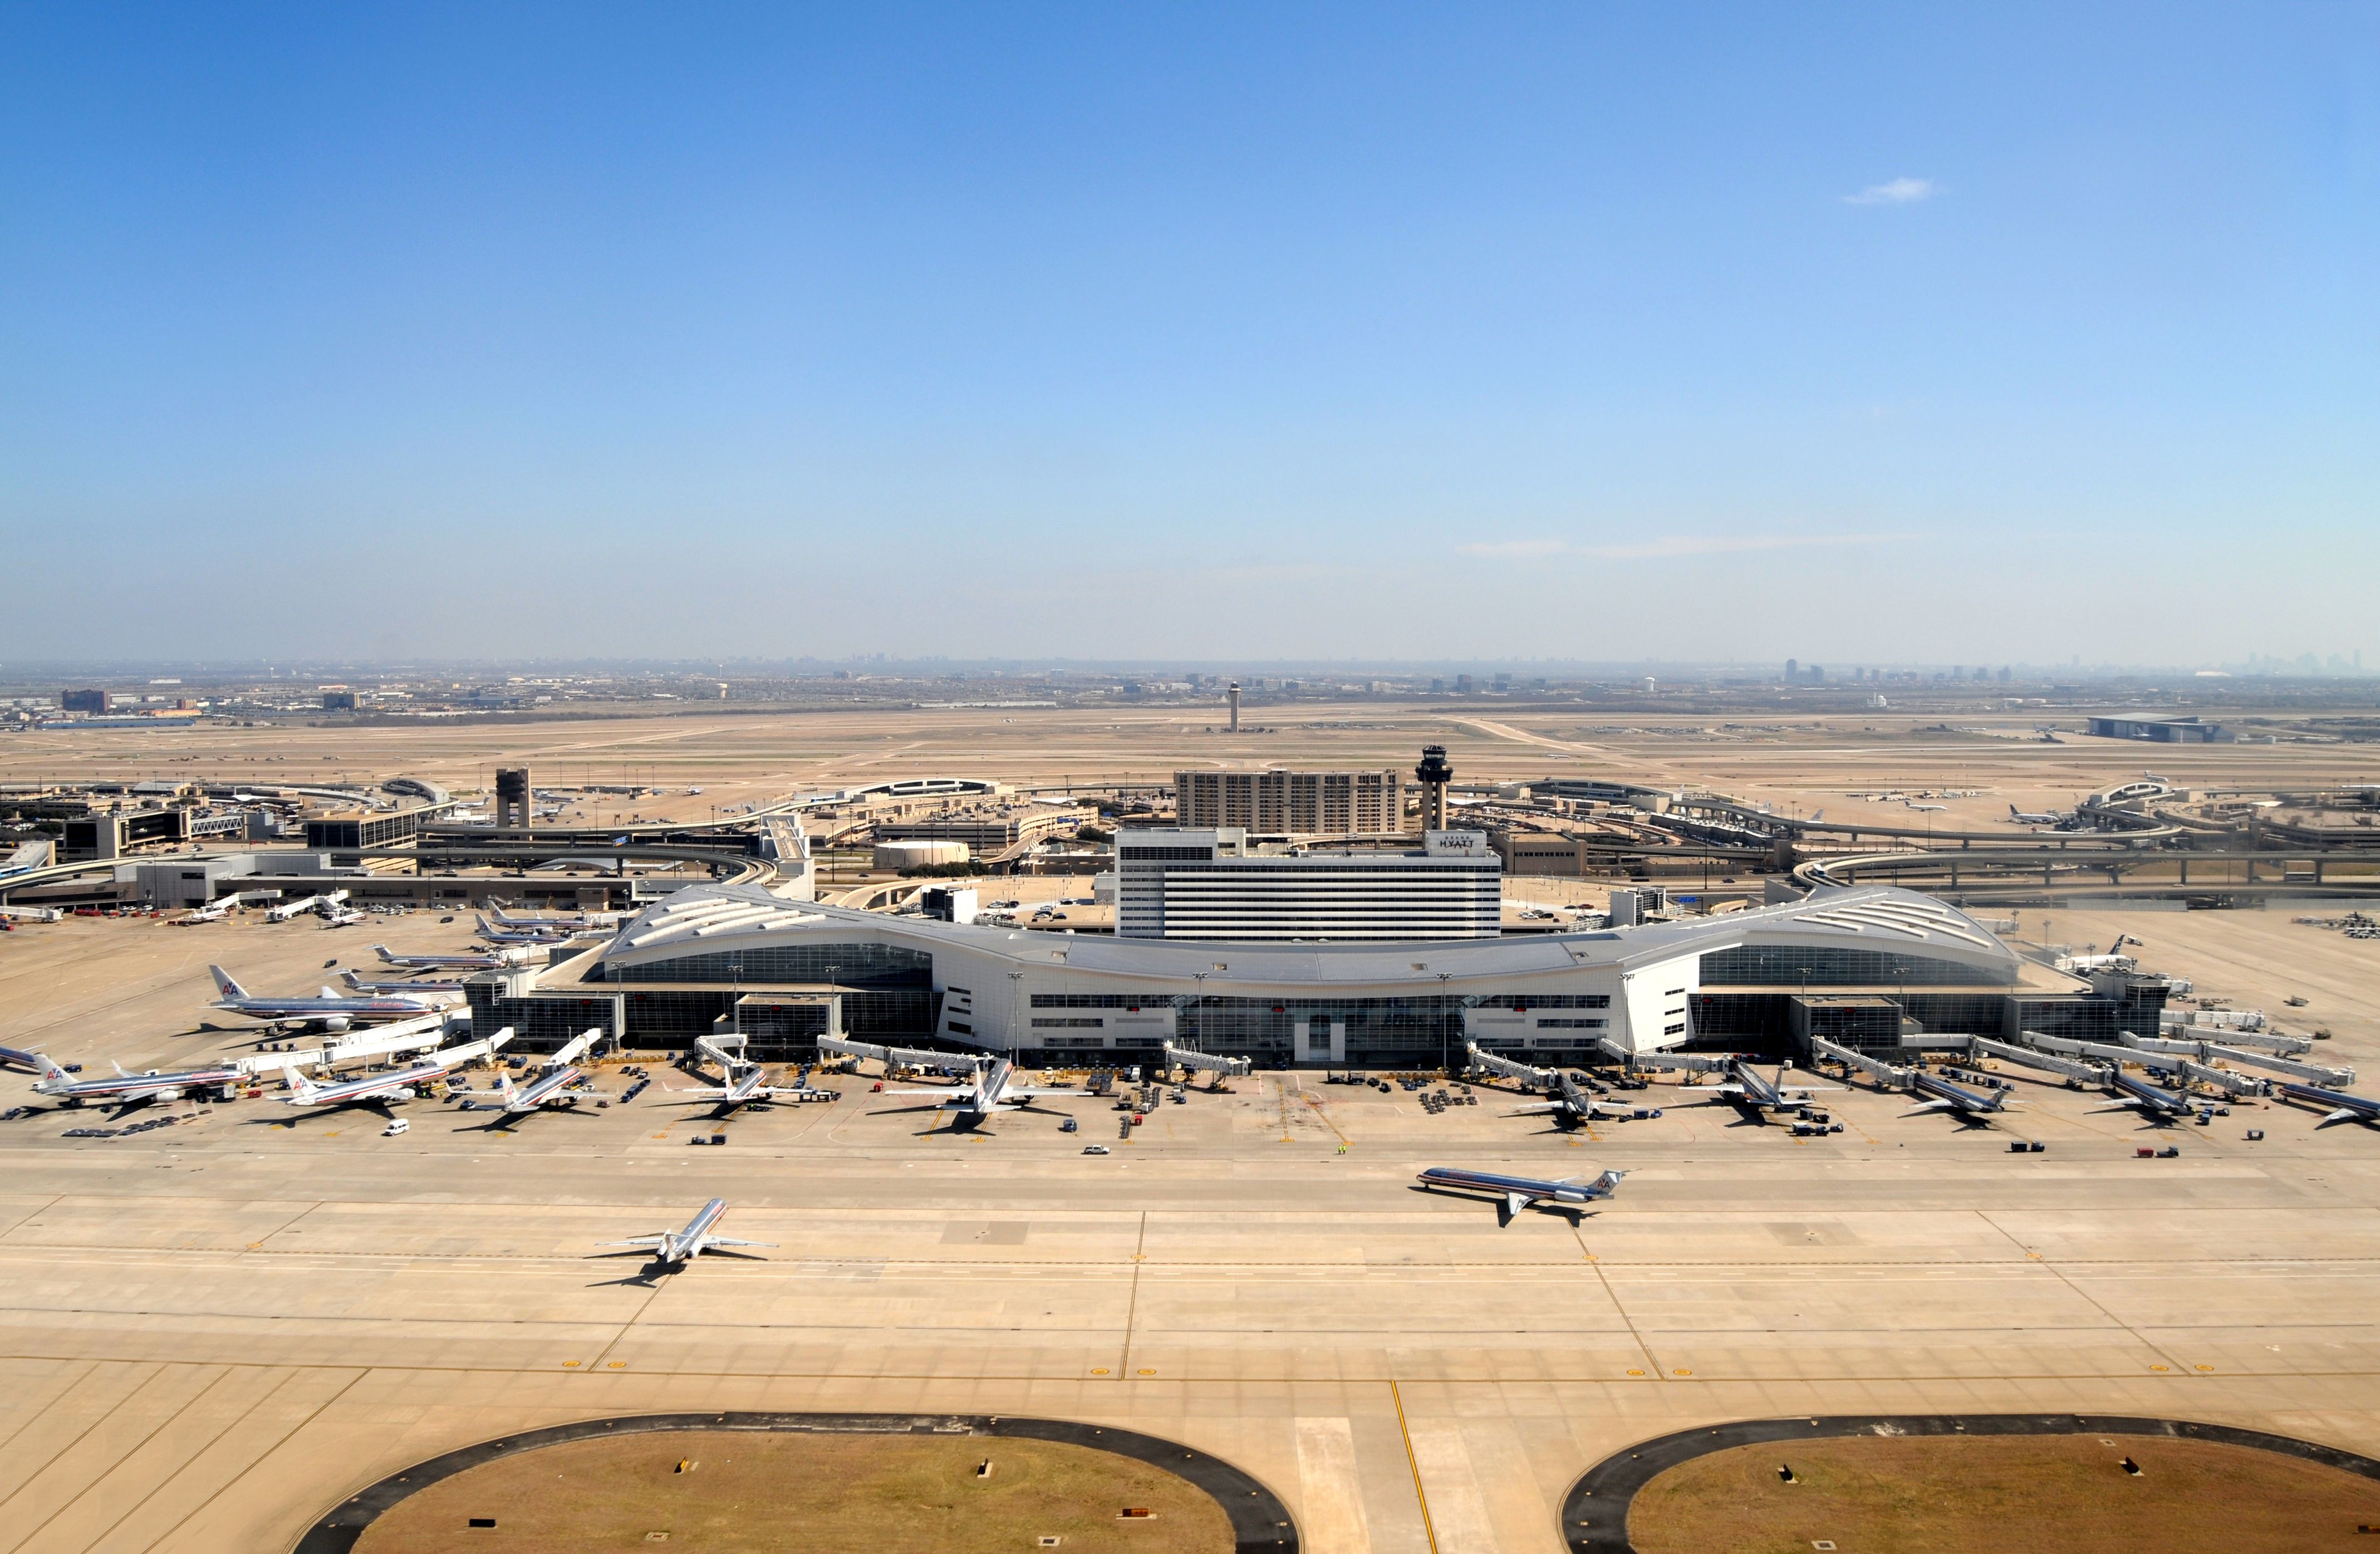 An overview of Dallas/Forth Worth International Airport (DFW)